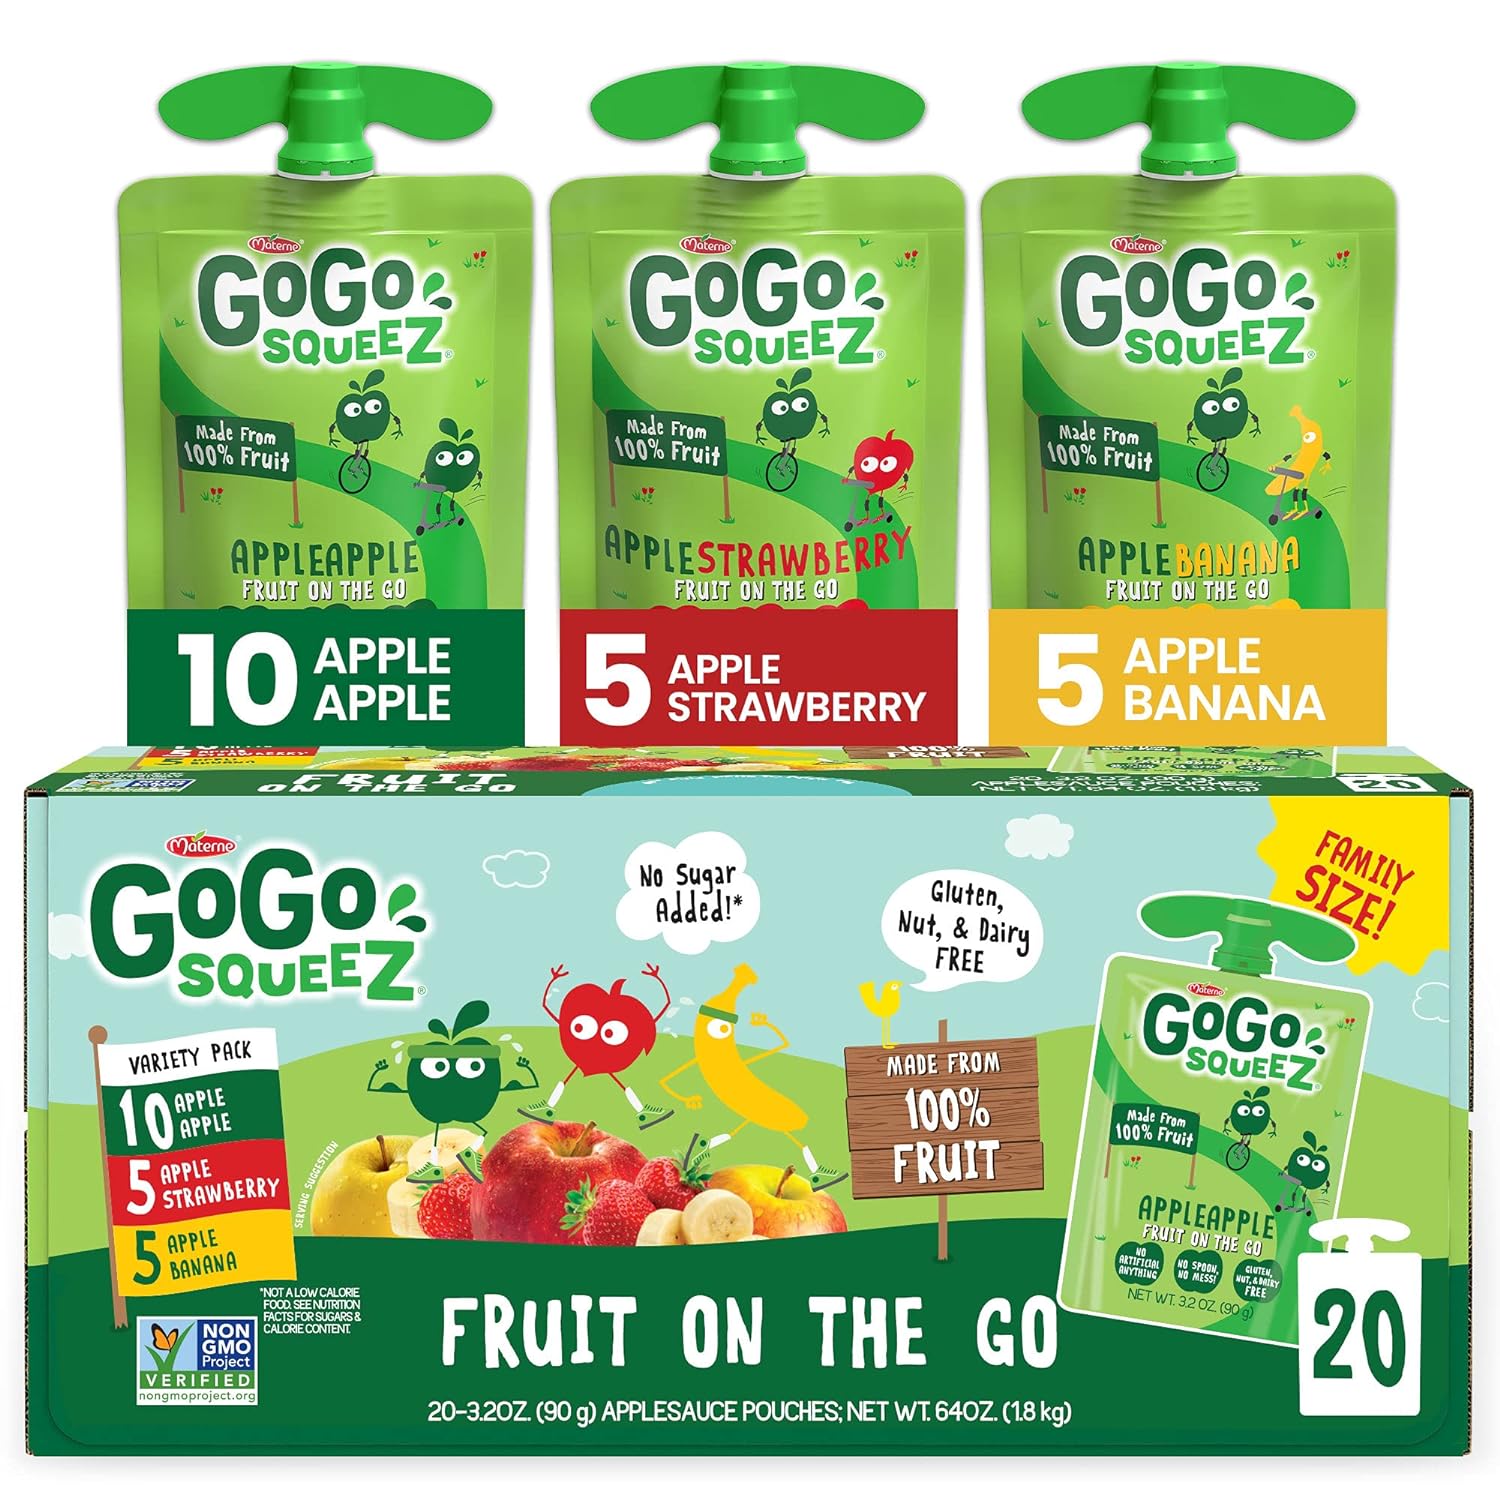 Review: GoGo squeeZ Fruit on the Go Variety Pack is a snack-time winner, offering a burst of fruity goodness with apple, peach, and Gimme Five! flavors. The 3.2 oz, recloseable pouches are perfect for on-the-go, and being unsweetened, gluten-free, nut-free, and dairy-free, they cater to health-conscious parents. With a BPA-free design, these convenient pouches make snacking easy, ensuring happy and healthy munching for kids and adults alike.